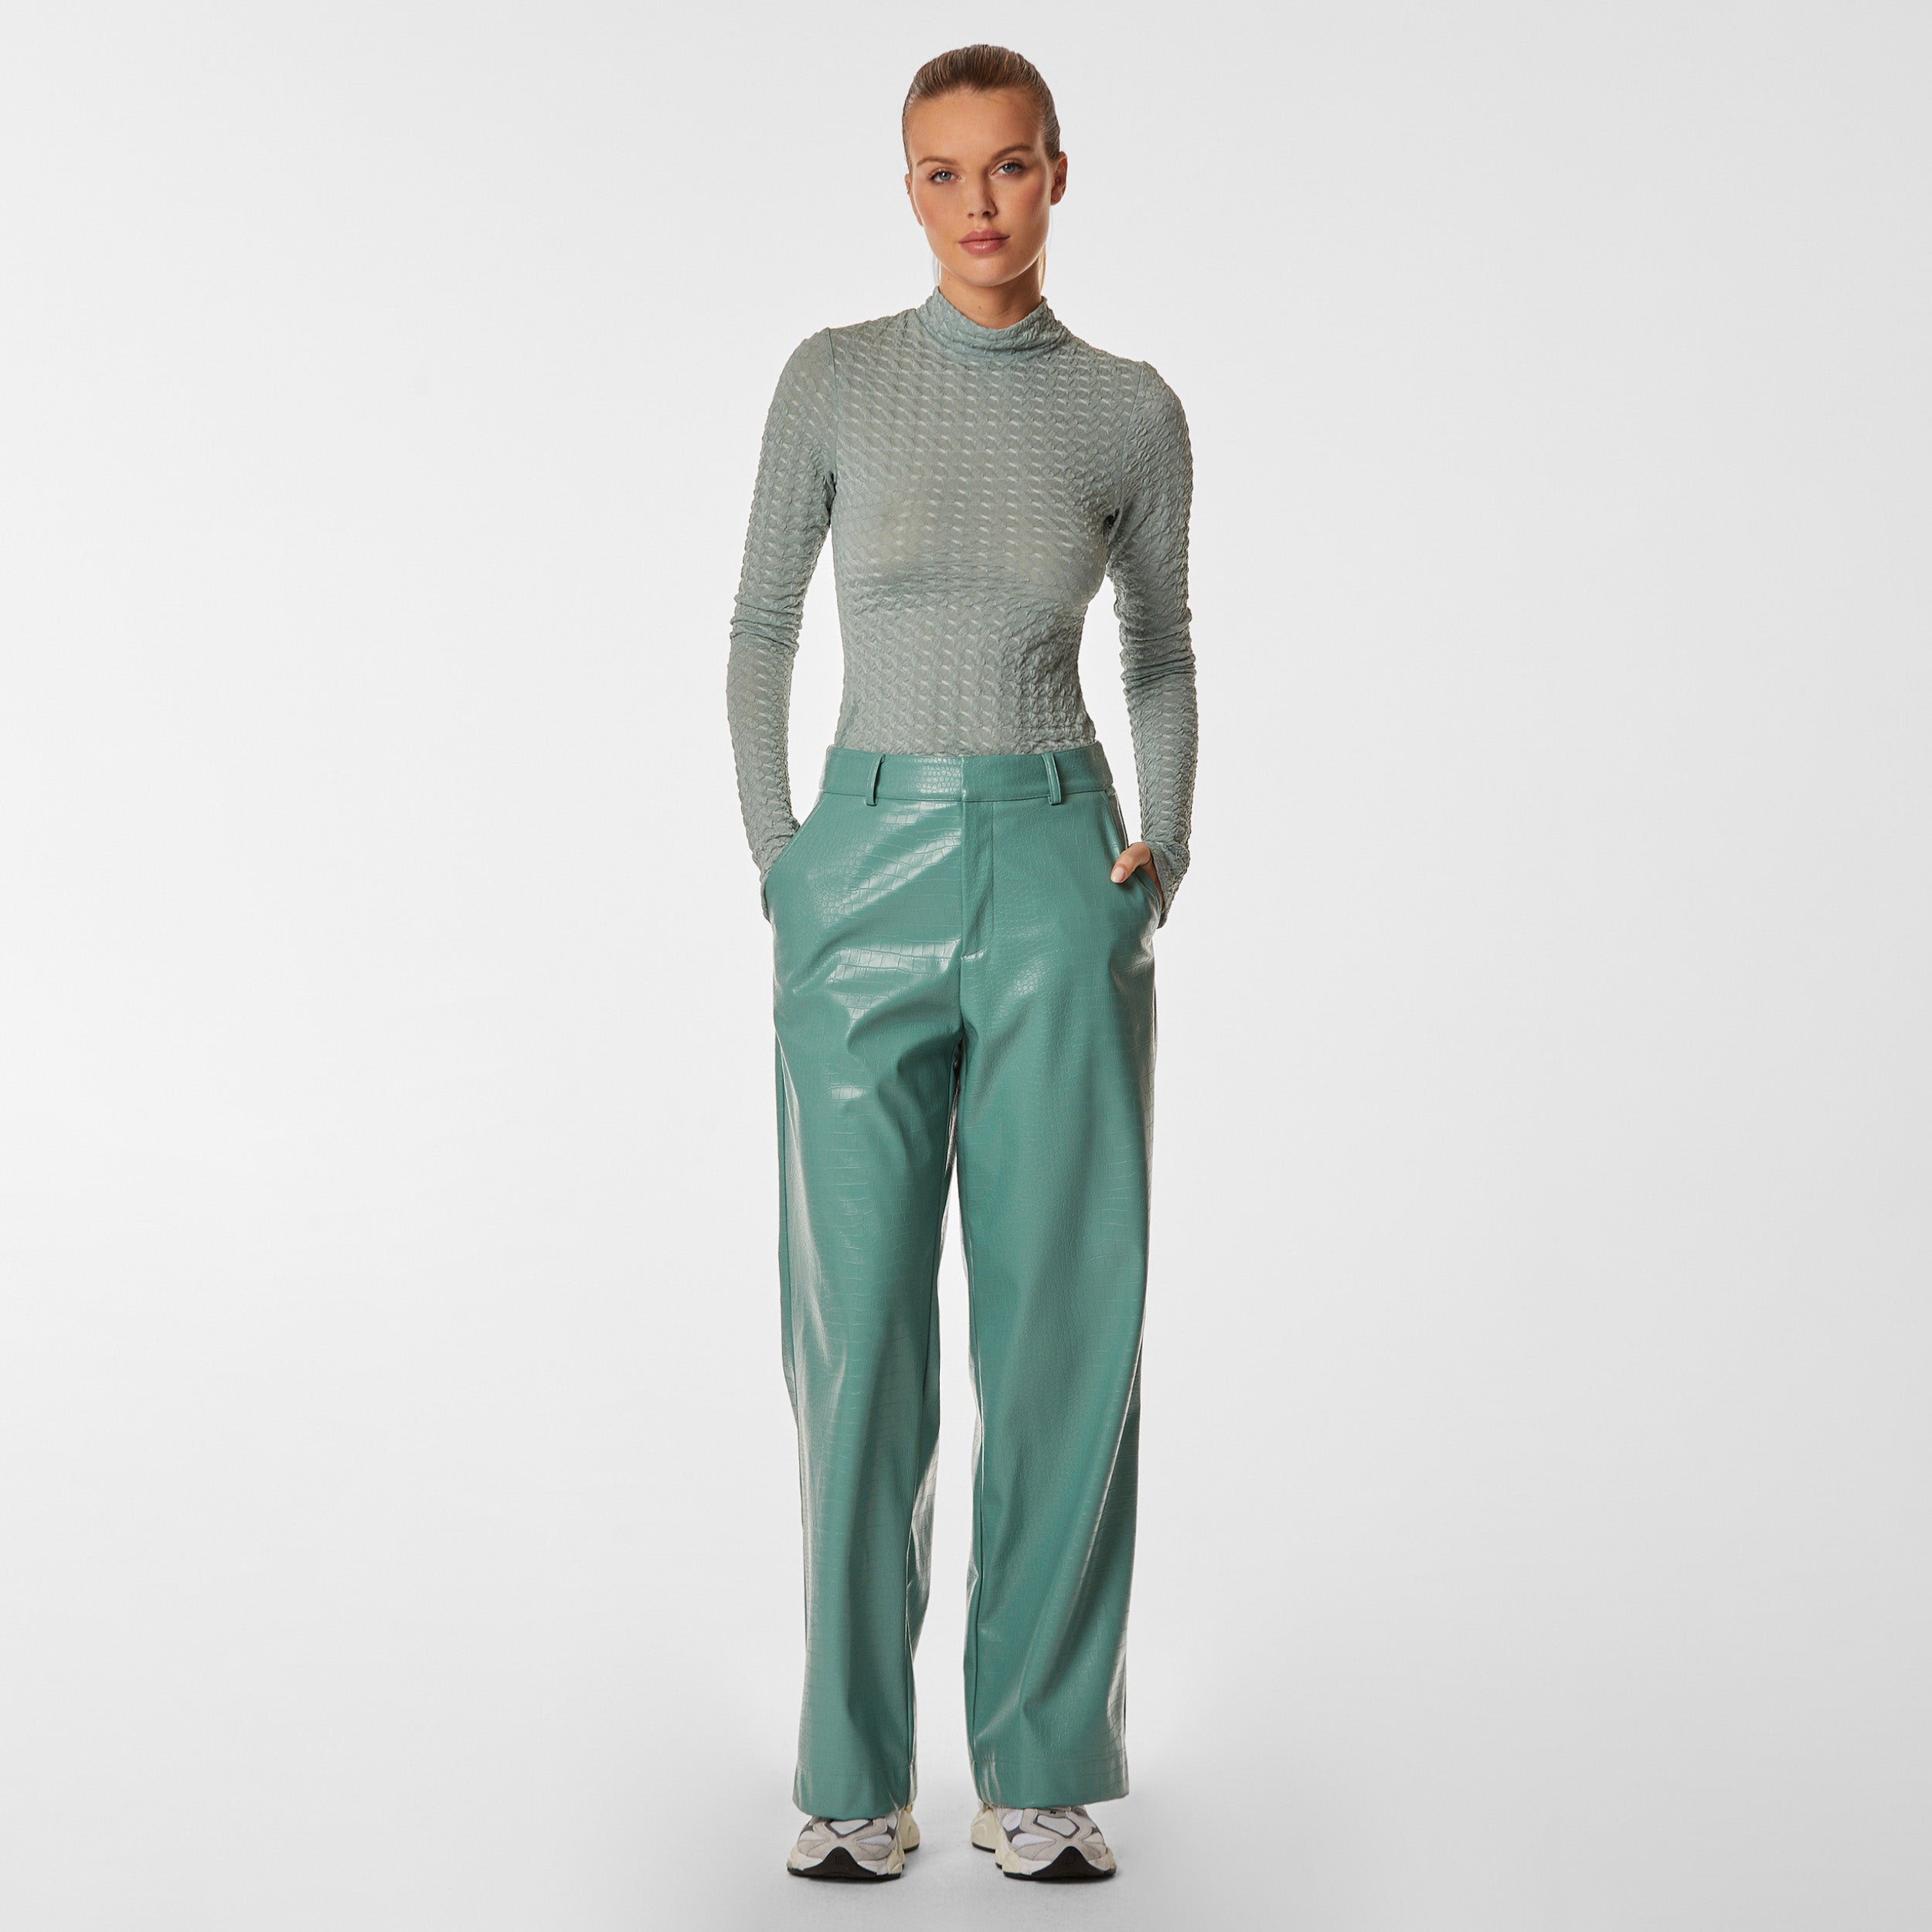 Fully body view of woman wearing green stretch mesh textured turtleneck sweater and mint green croco embossed faux leather pant.